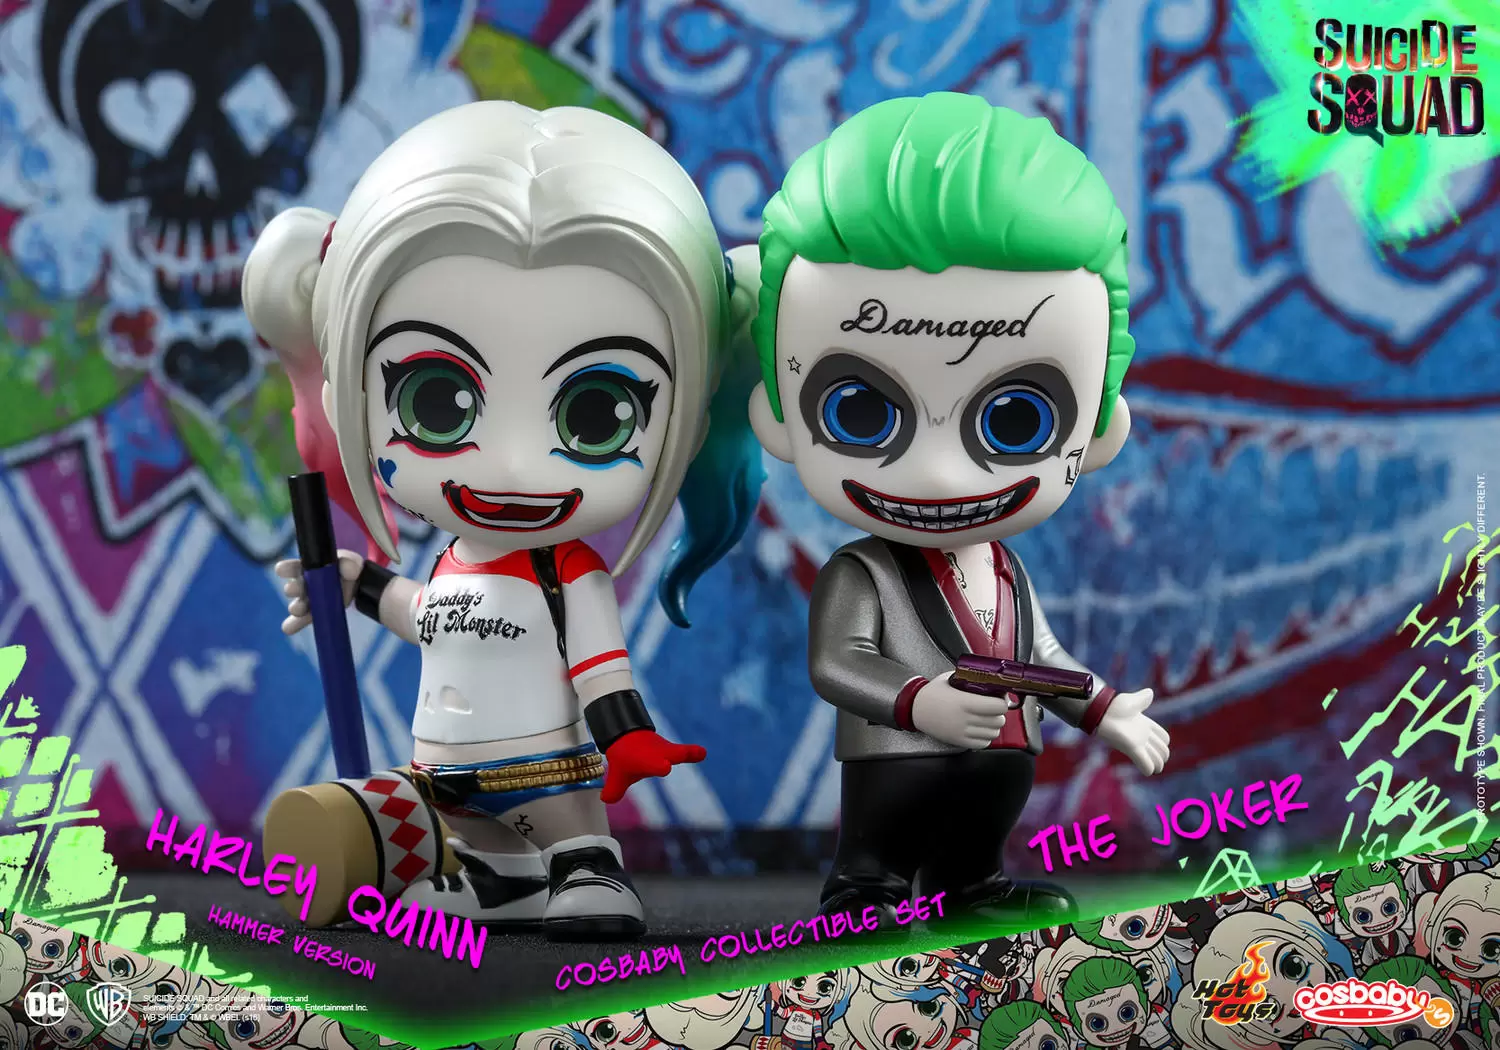 Cosbaby Figures - The Joker And Harley Quinn Hammer Version 2 Pack